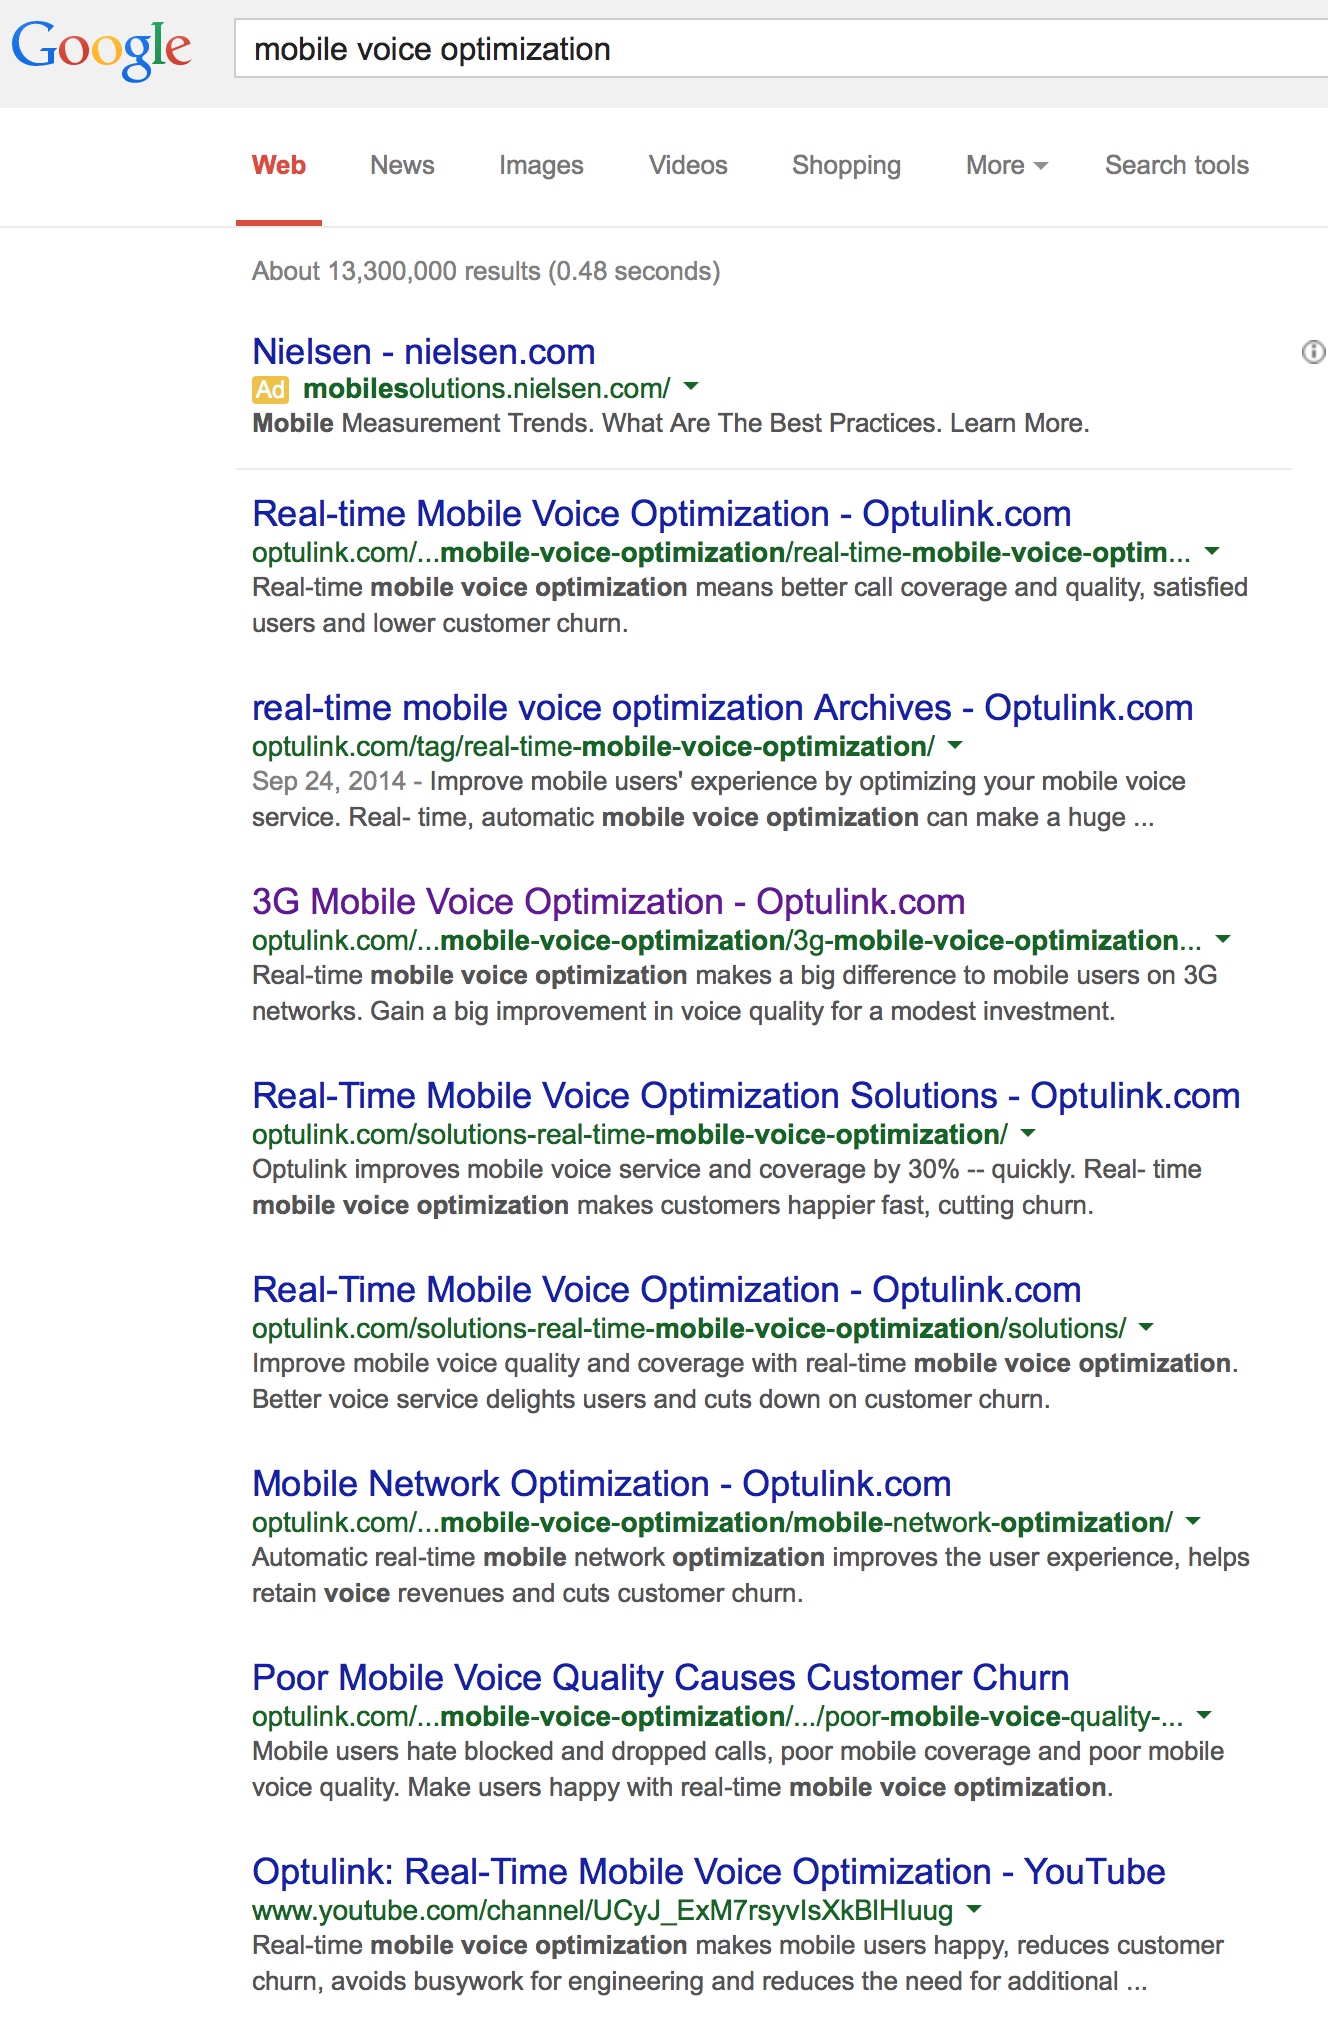 Optulink dominates the page 1 of a Google search on "mobile voice optimization "